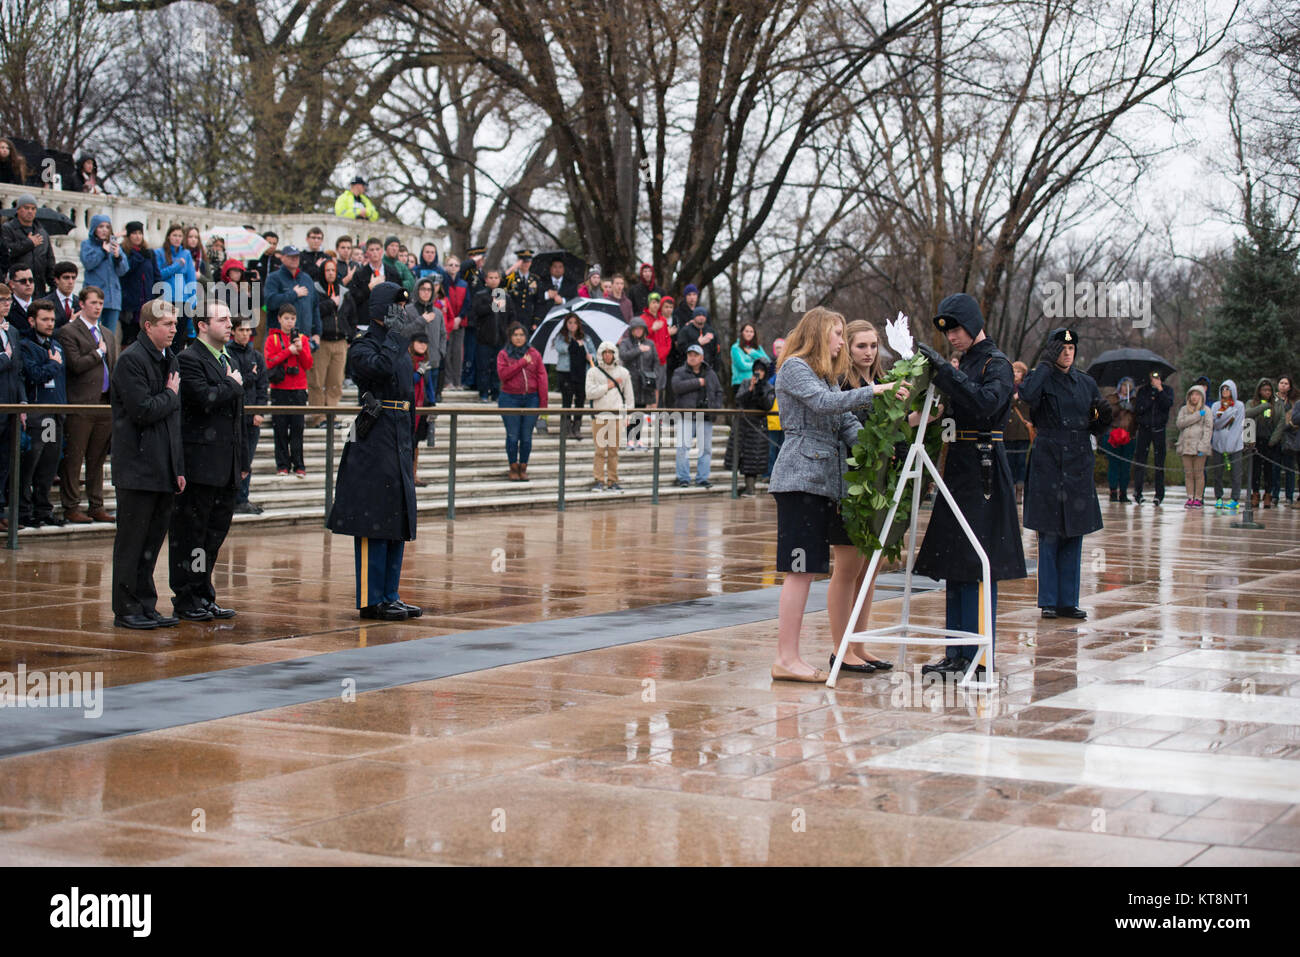 From the left, Andrew Pogue, from Missouri; Dakota Fleury, from Washington, D.C.; Marion Lovett, from New Hampshire; and Amanda Finnegan, from South Dakota; represent the high school students participating in the United States Senate Youth Program during a wreath laying ceremony at the Tomb of the Unknown Soldier in Arlington National Cemetery, March 10, 2017, in Arlington, Va. The students also toured the Memorial Amphitheater Display Room. (U.S. Army photo by Rachel Larue/Arlington National Cemetery/released) Stock Photo